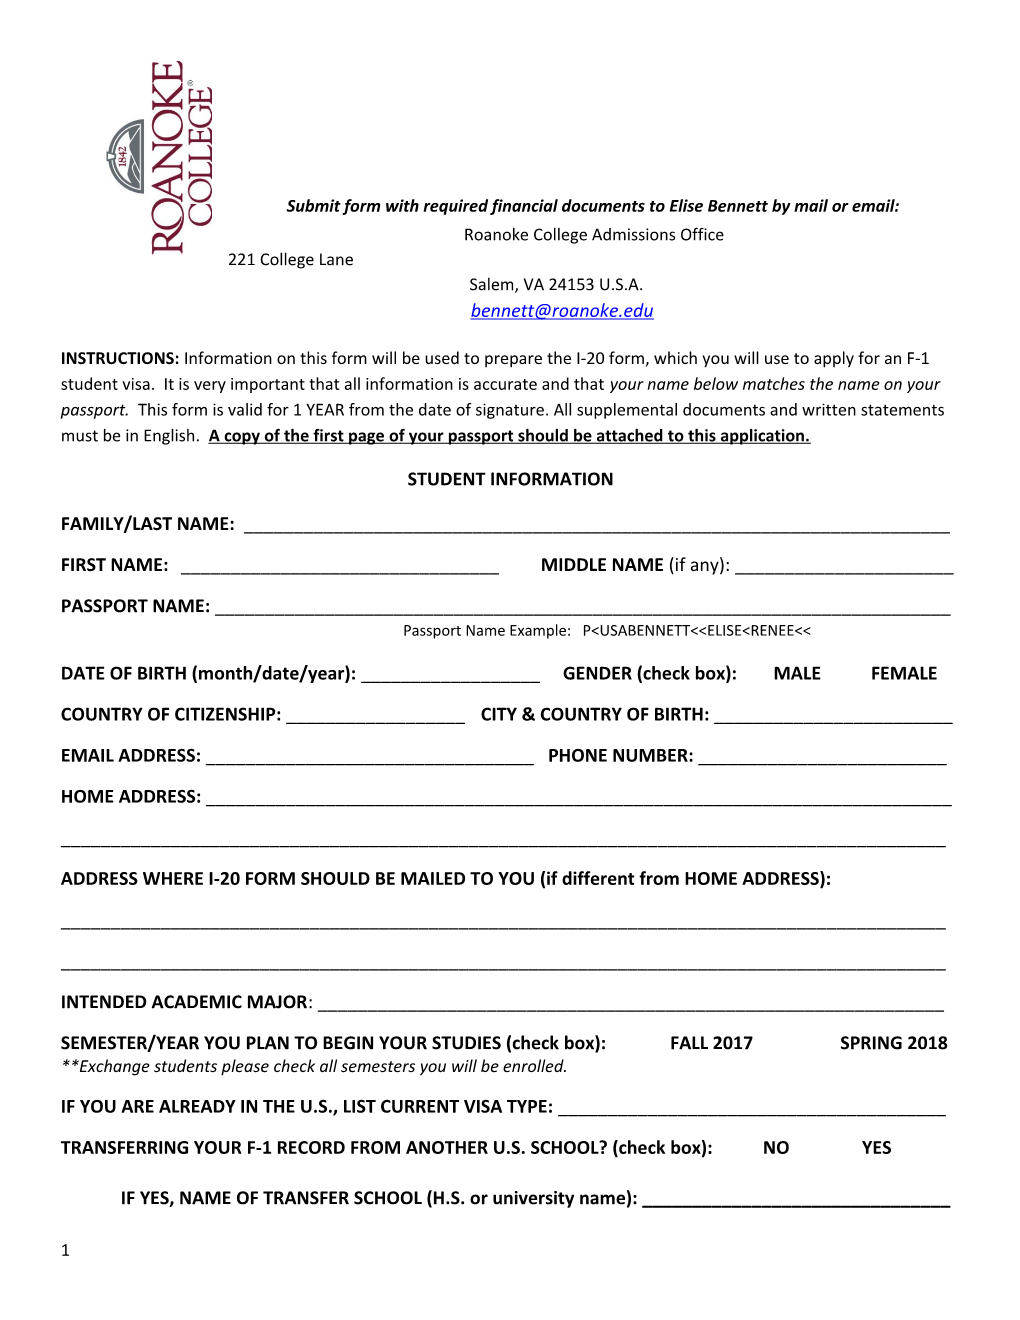 Submit Form with Required Financial Documents to Elise Bennett by Mail Or Email